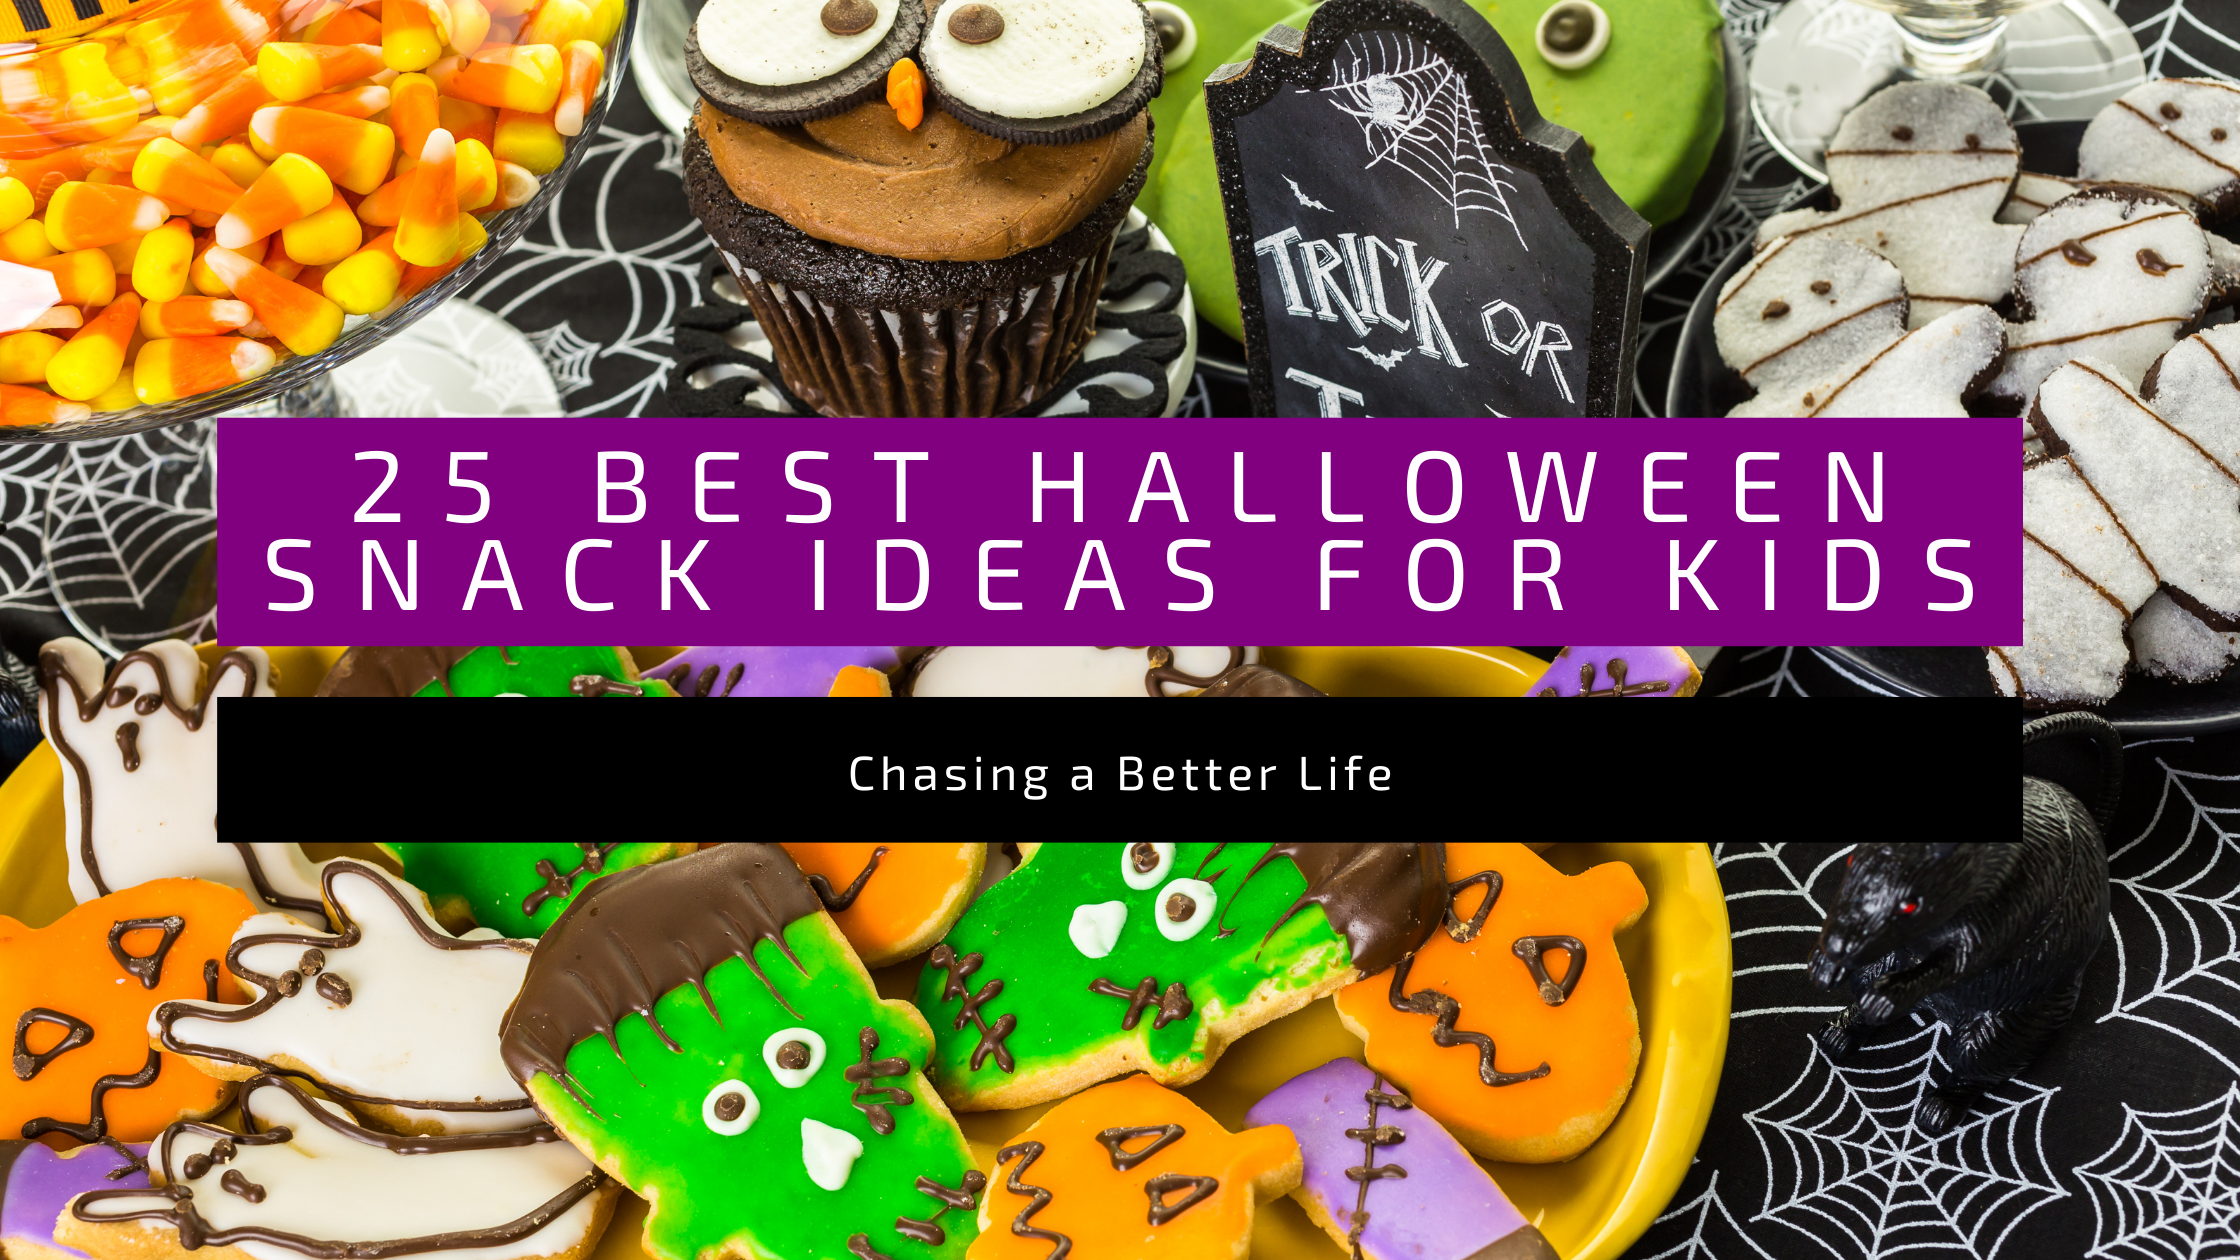 The 25 Best Halloween Snack Ideas for Kids 24